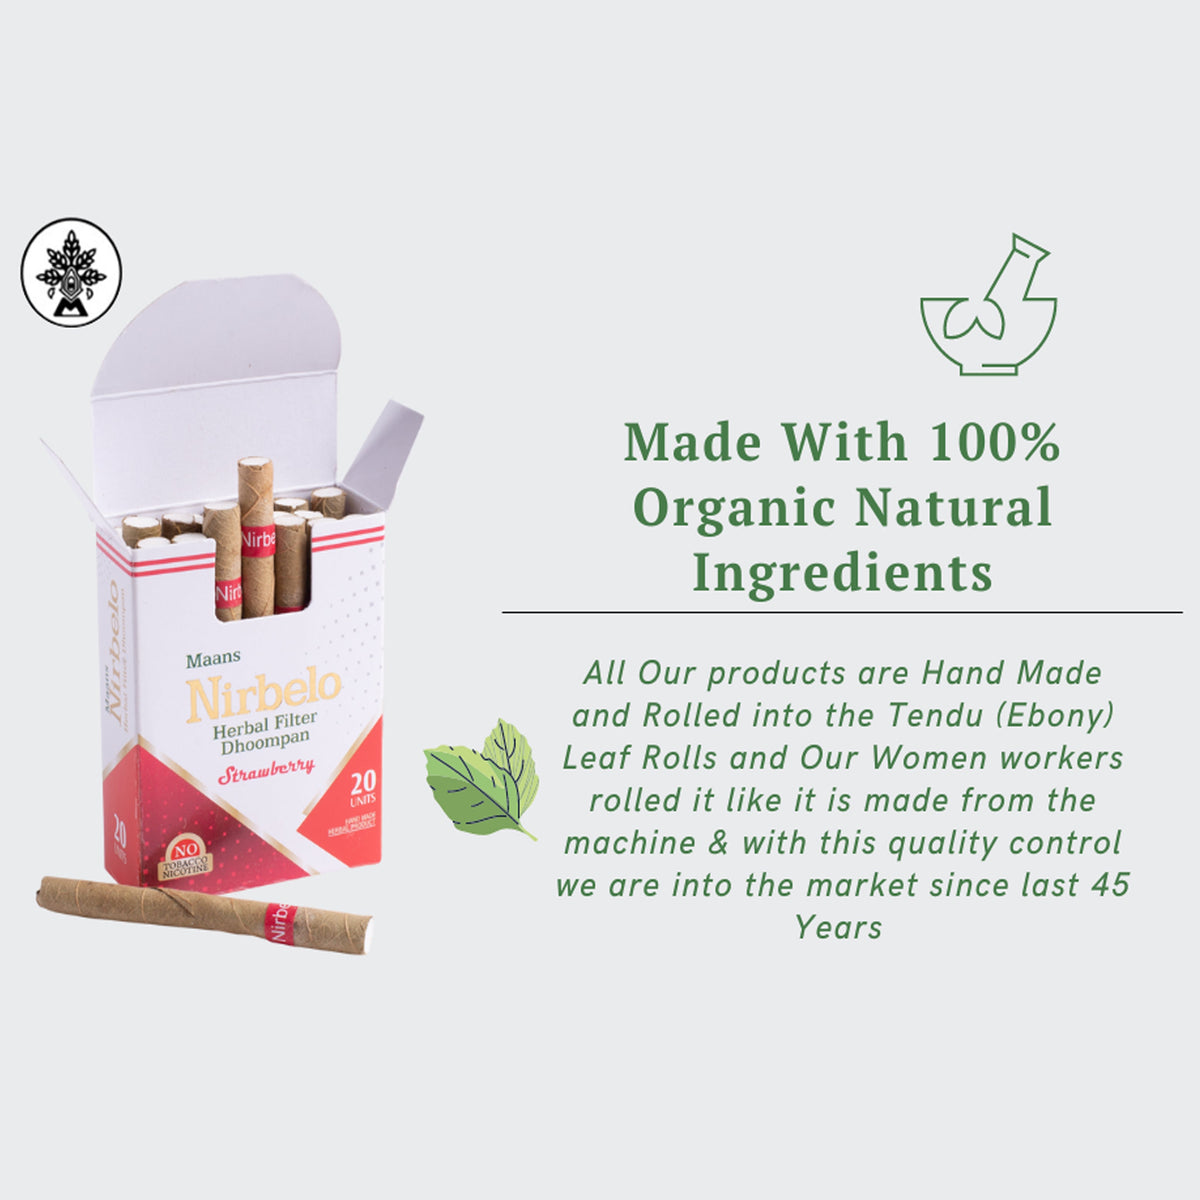 Nirbelo Herbal Filter Dhoompan Strawberry Flavor 100% Tobacco Free & Nicotine Free Cigarette Natural Organic Ingredients for Quit Smoking & Nature's Alternative to Tobacco